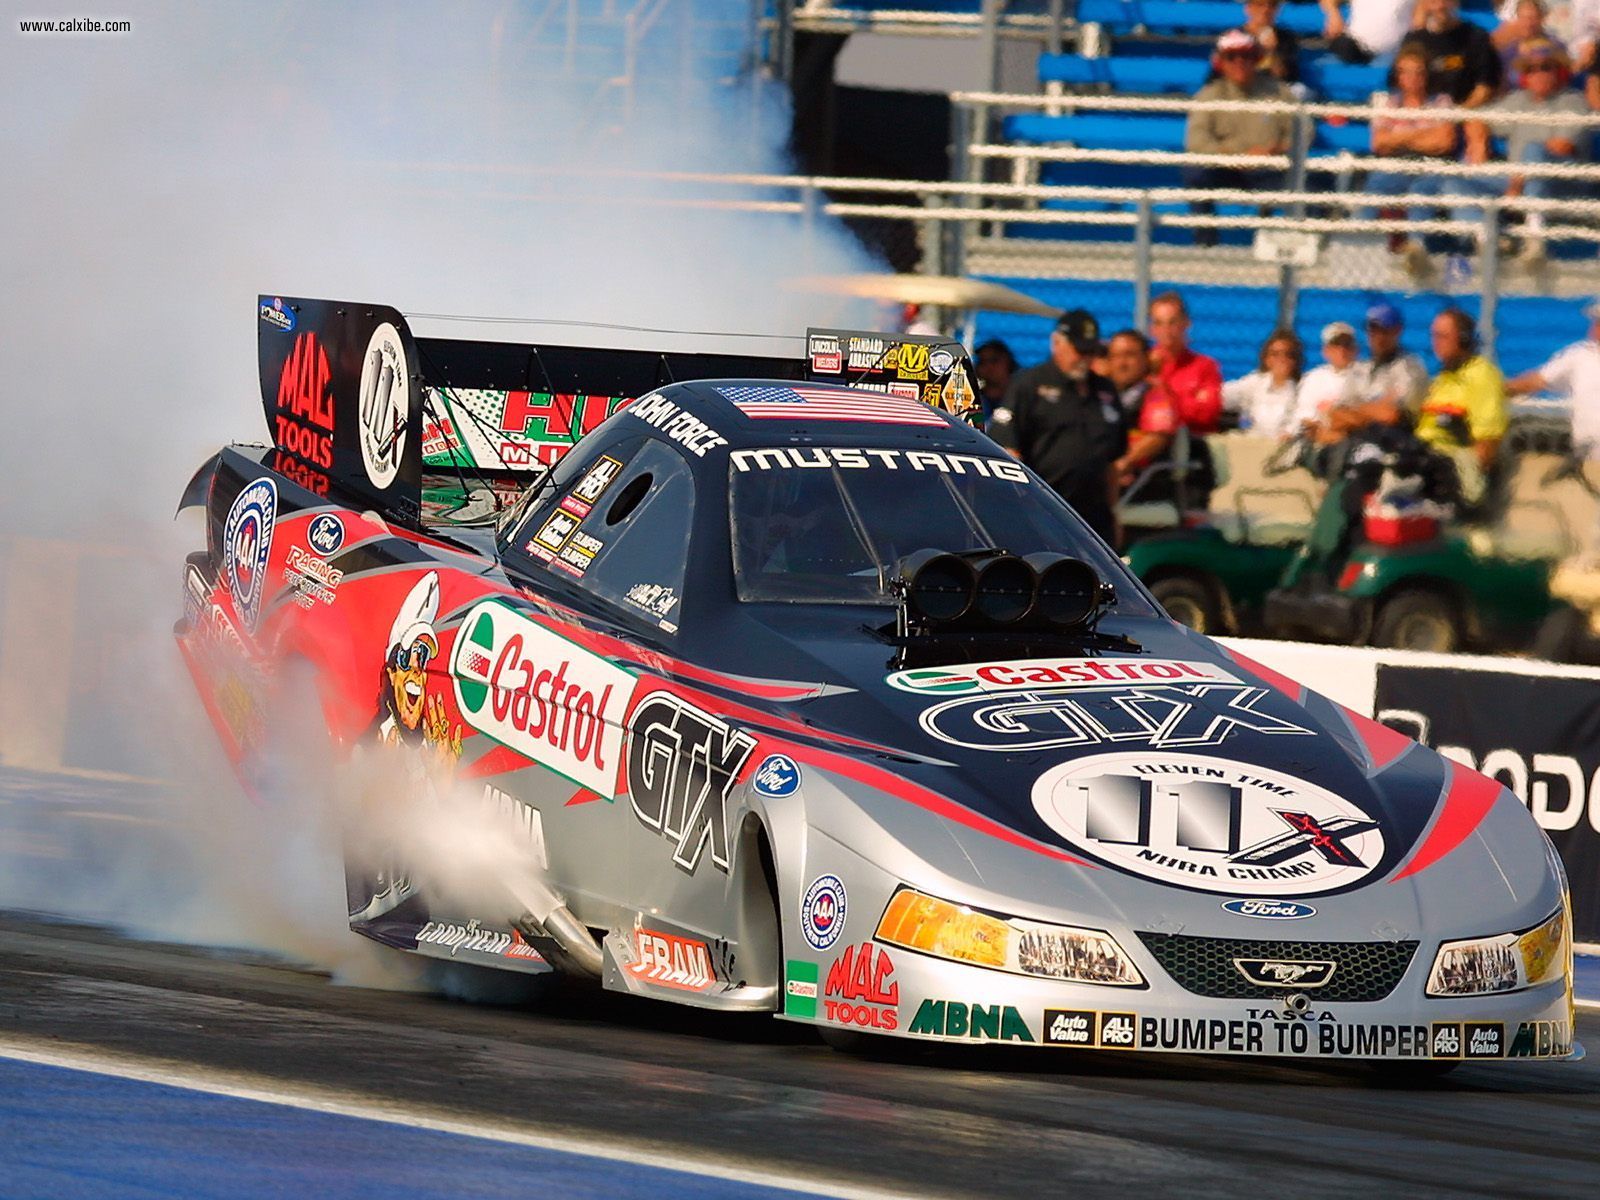 John Force Funny Car Wallpaper Image Amp Pictures Becuo